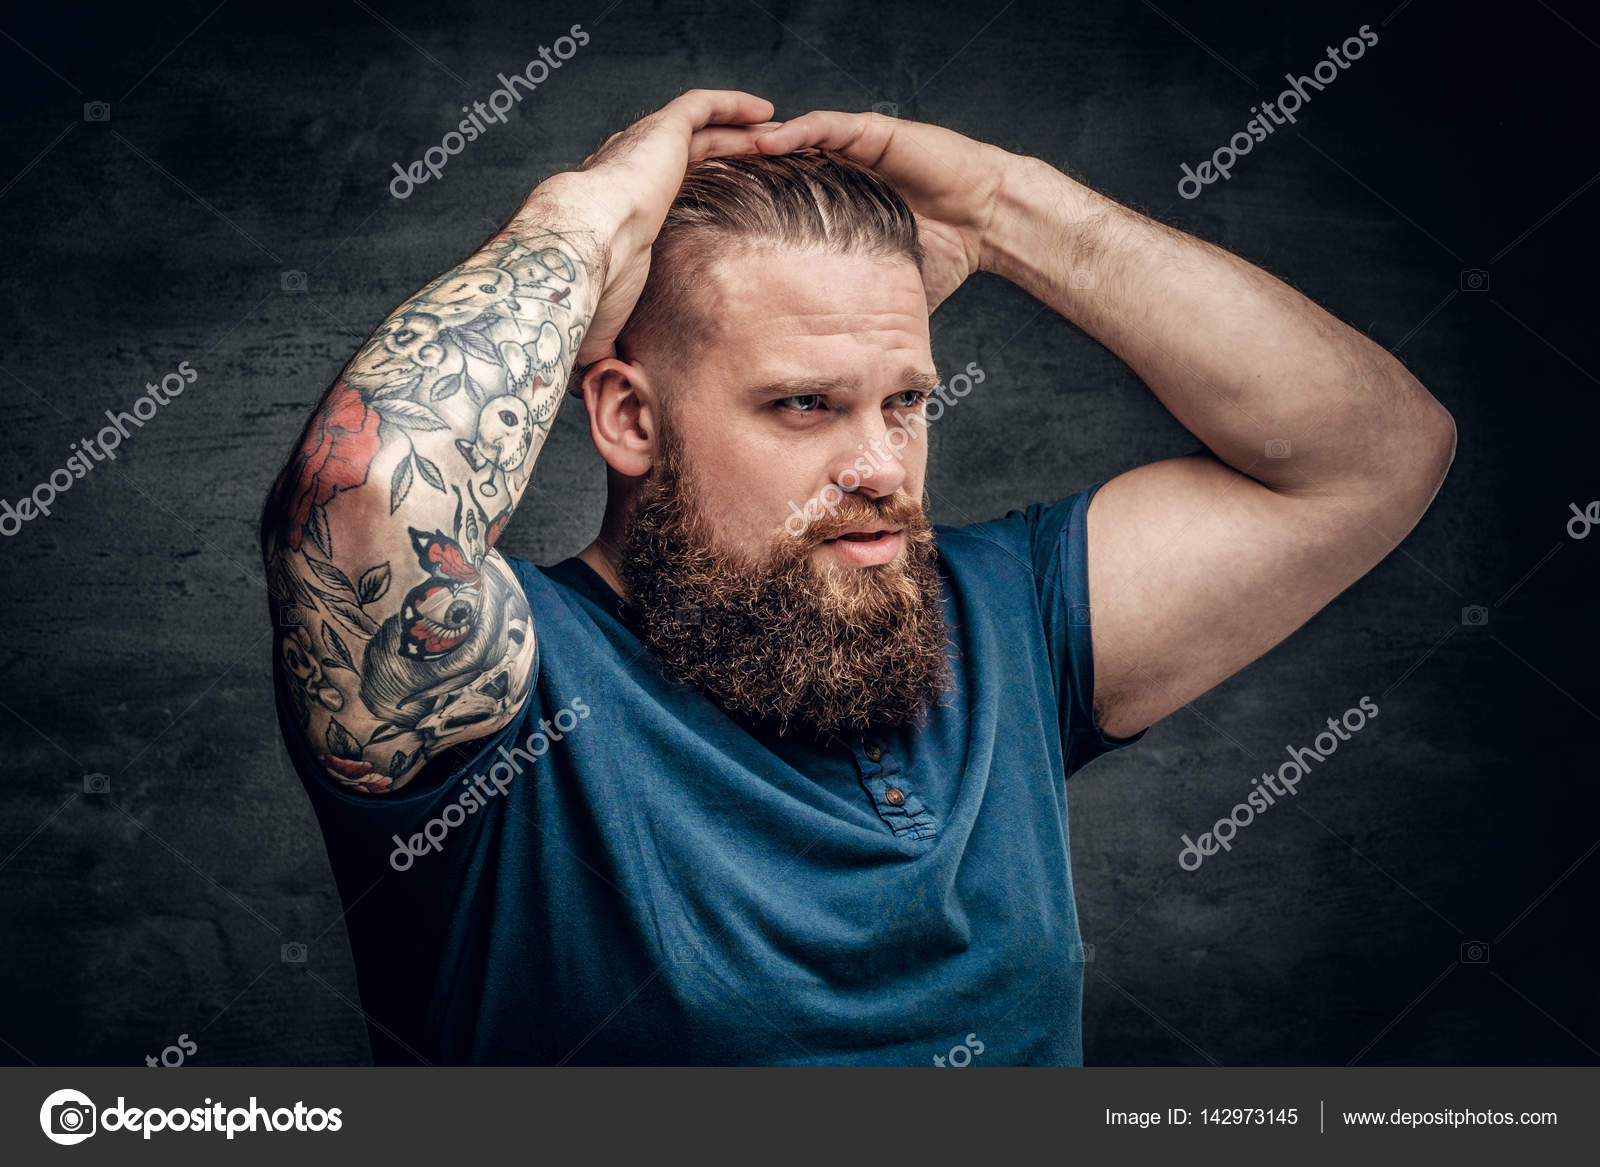 Bearded fat male with tattoos on arm — Stock Photo © fxquadro #142973145